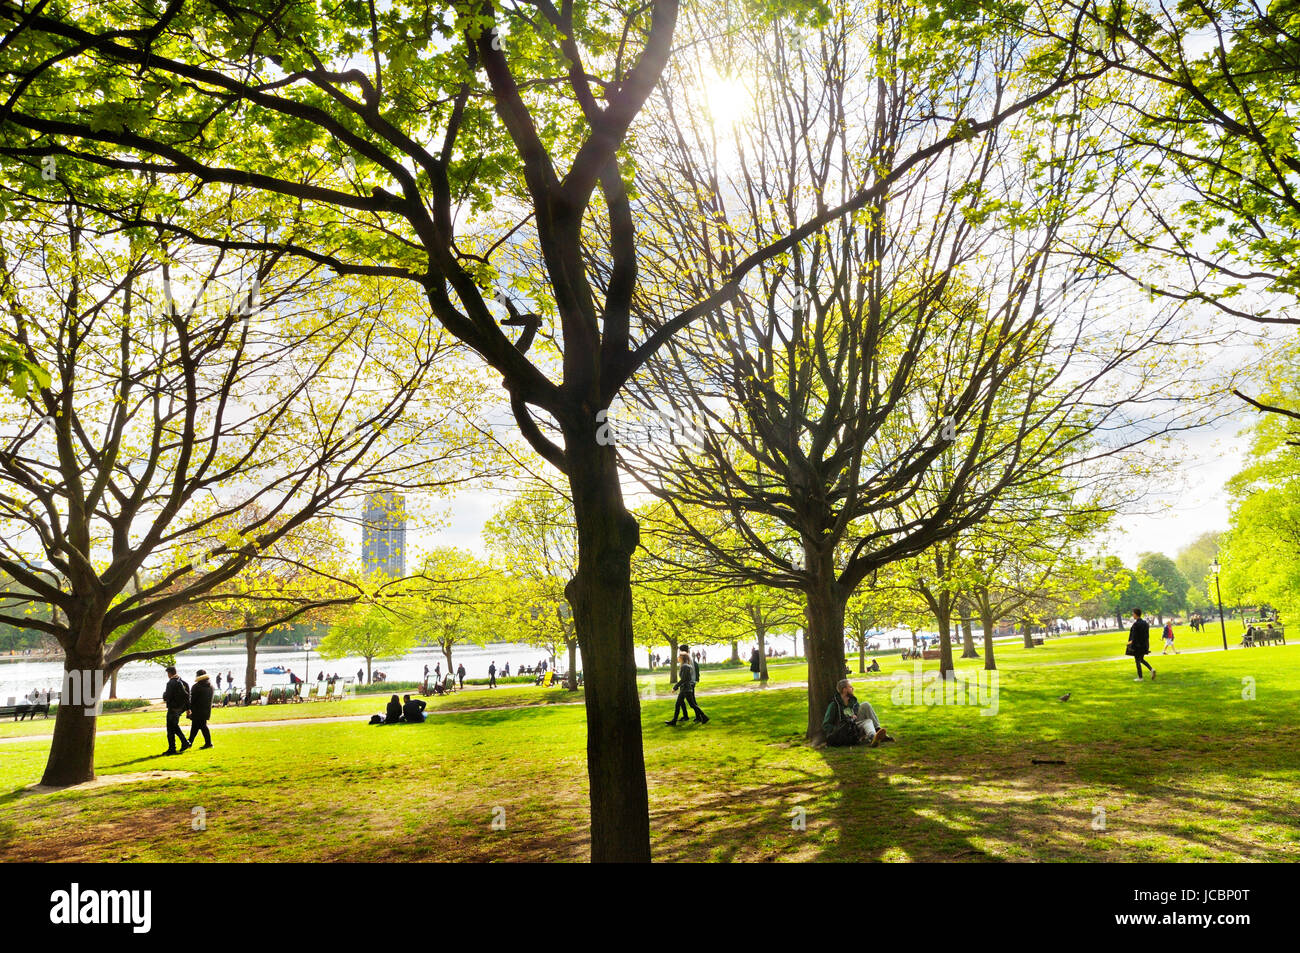 Hyde Park, London.  A leisurely walk beneath sun-dappled trees in London's Hyde Park towards the famous Serpentine River. Stock Photo